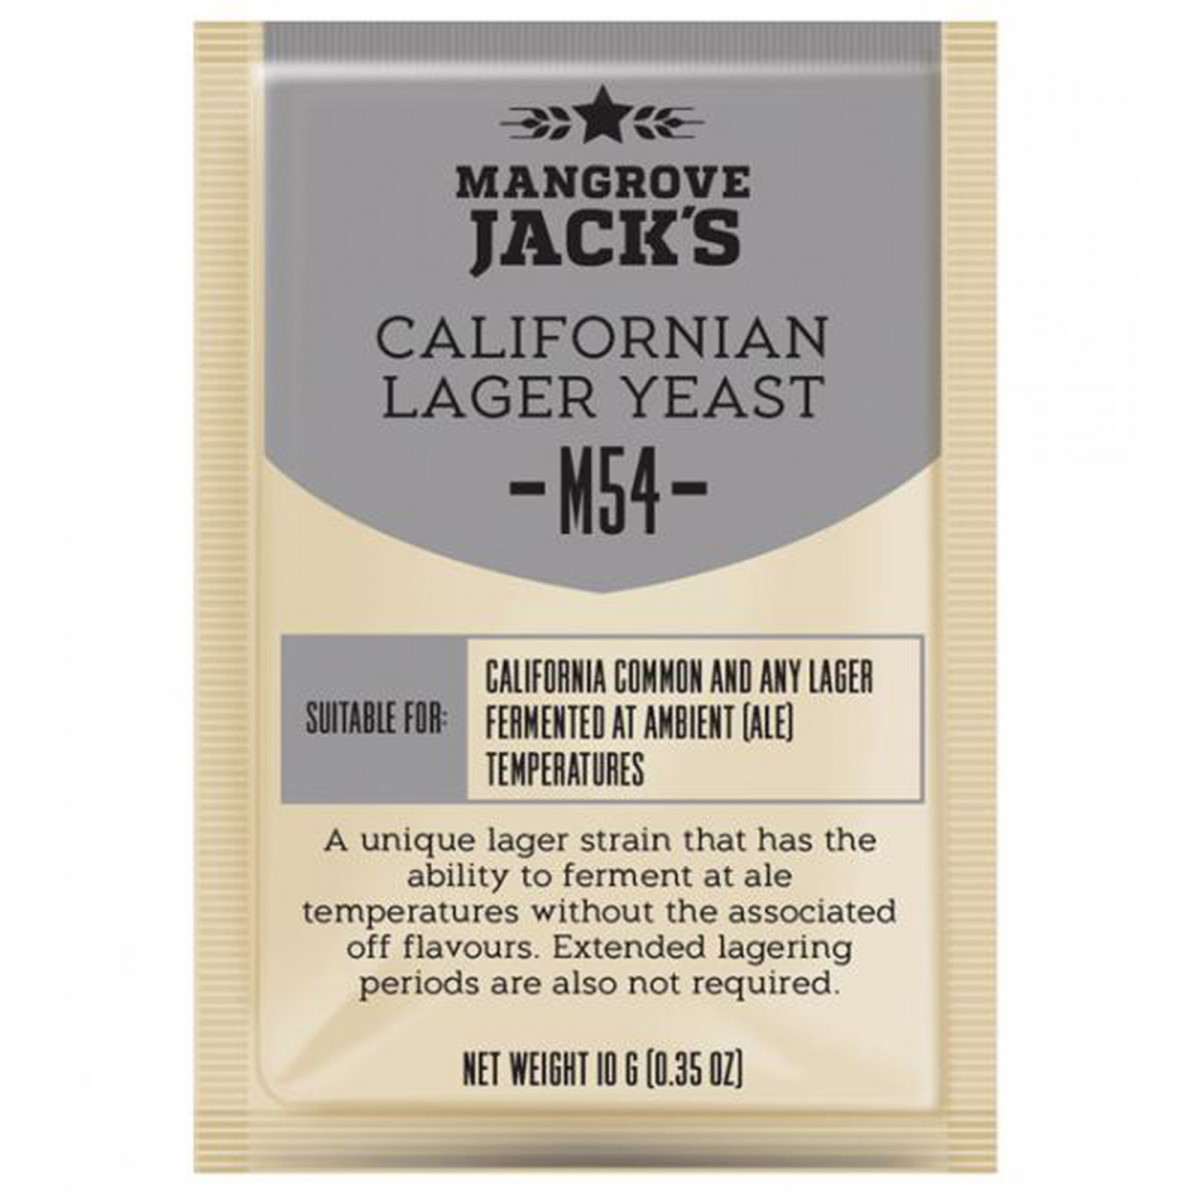 Dried brewing yeast Californian Lager M54 - 10 g - Mangrove Jack's Craft Series